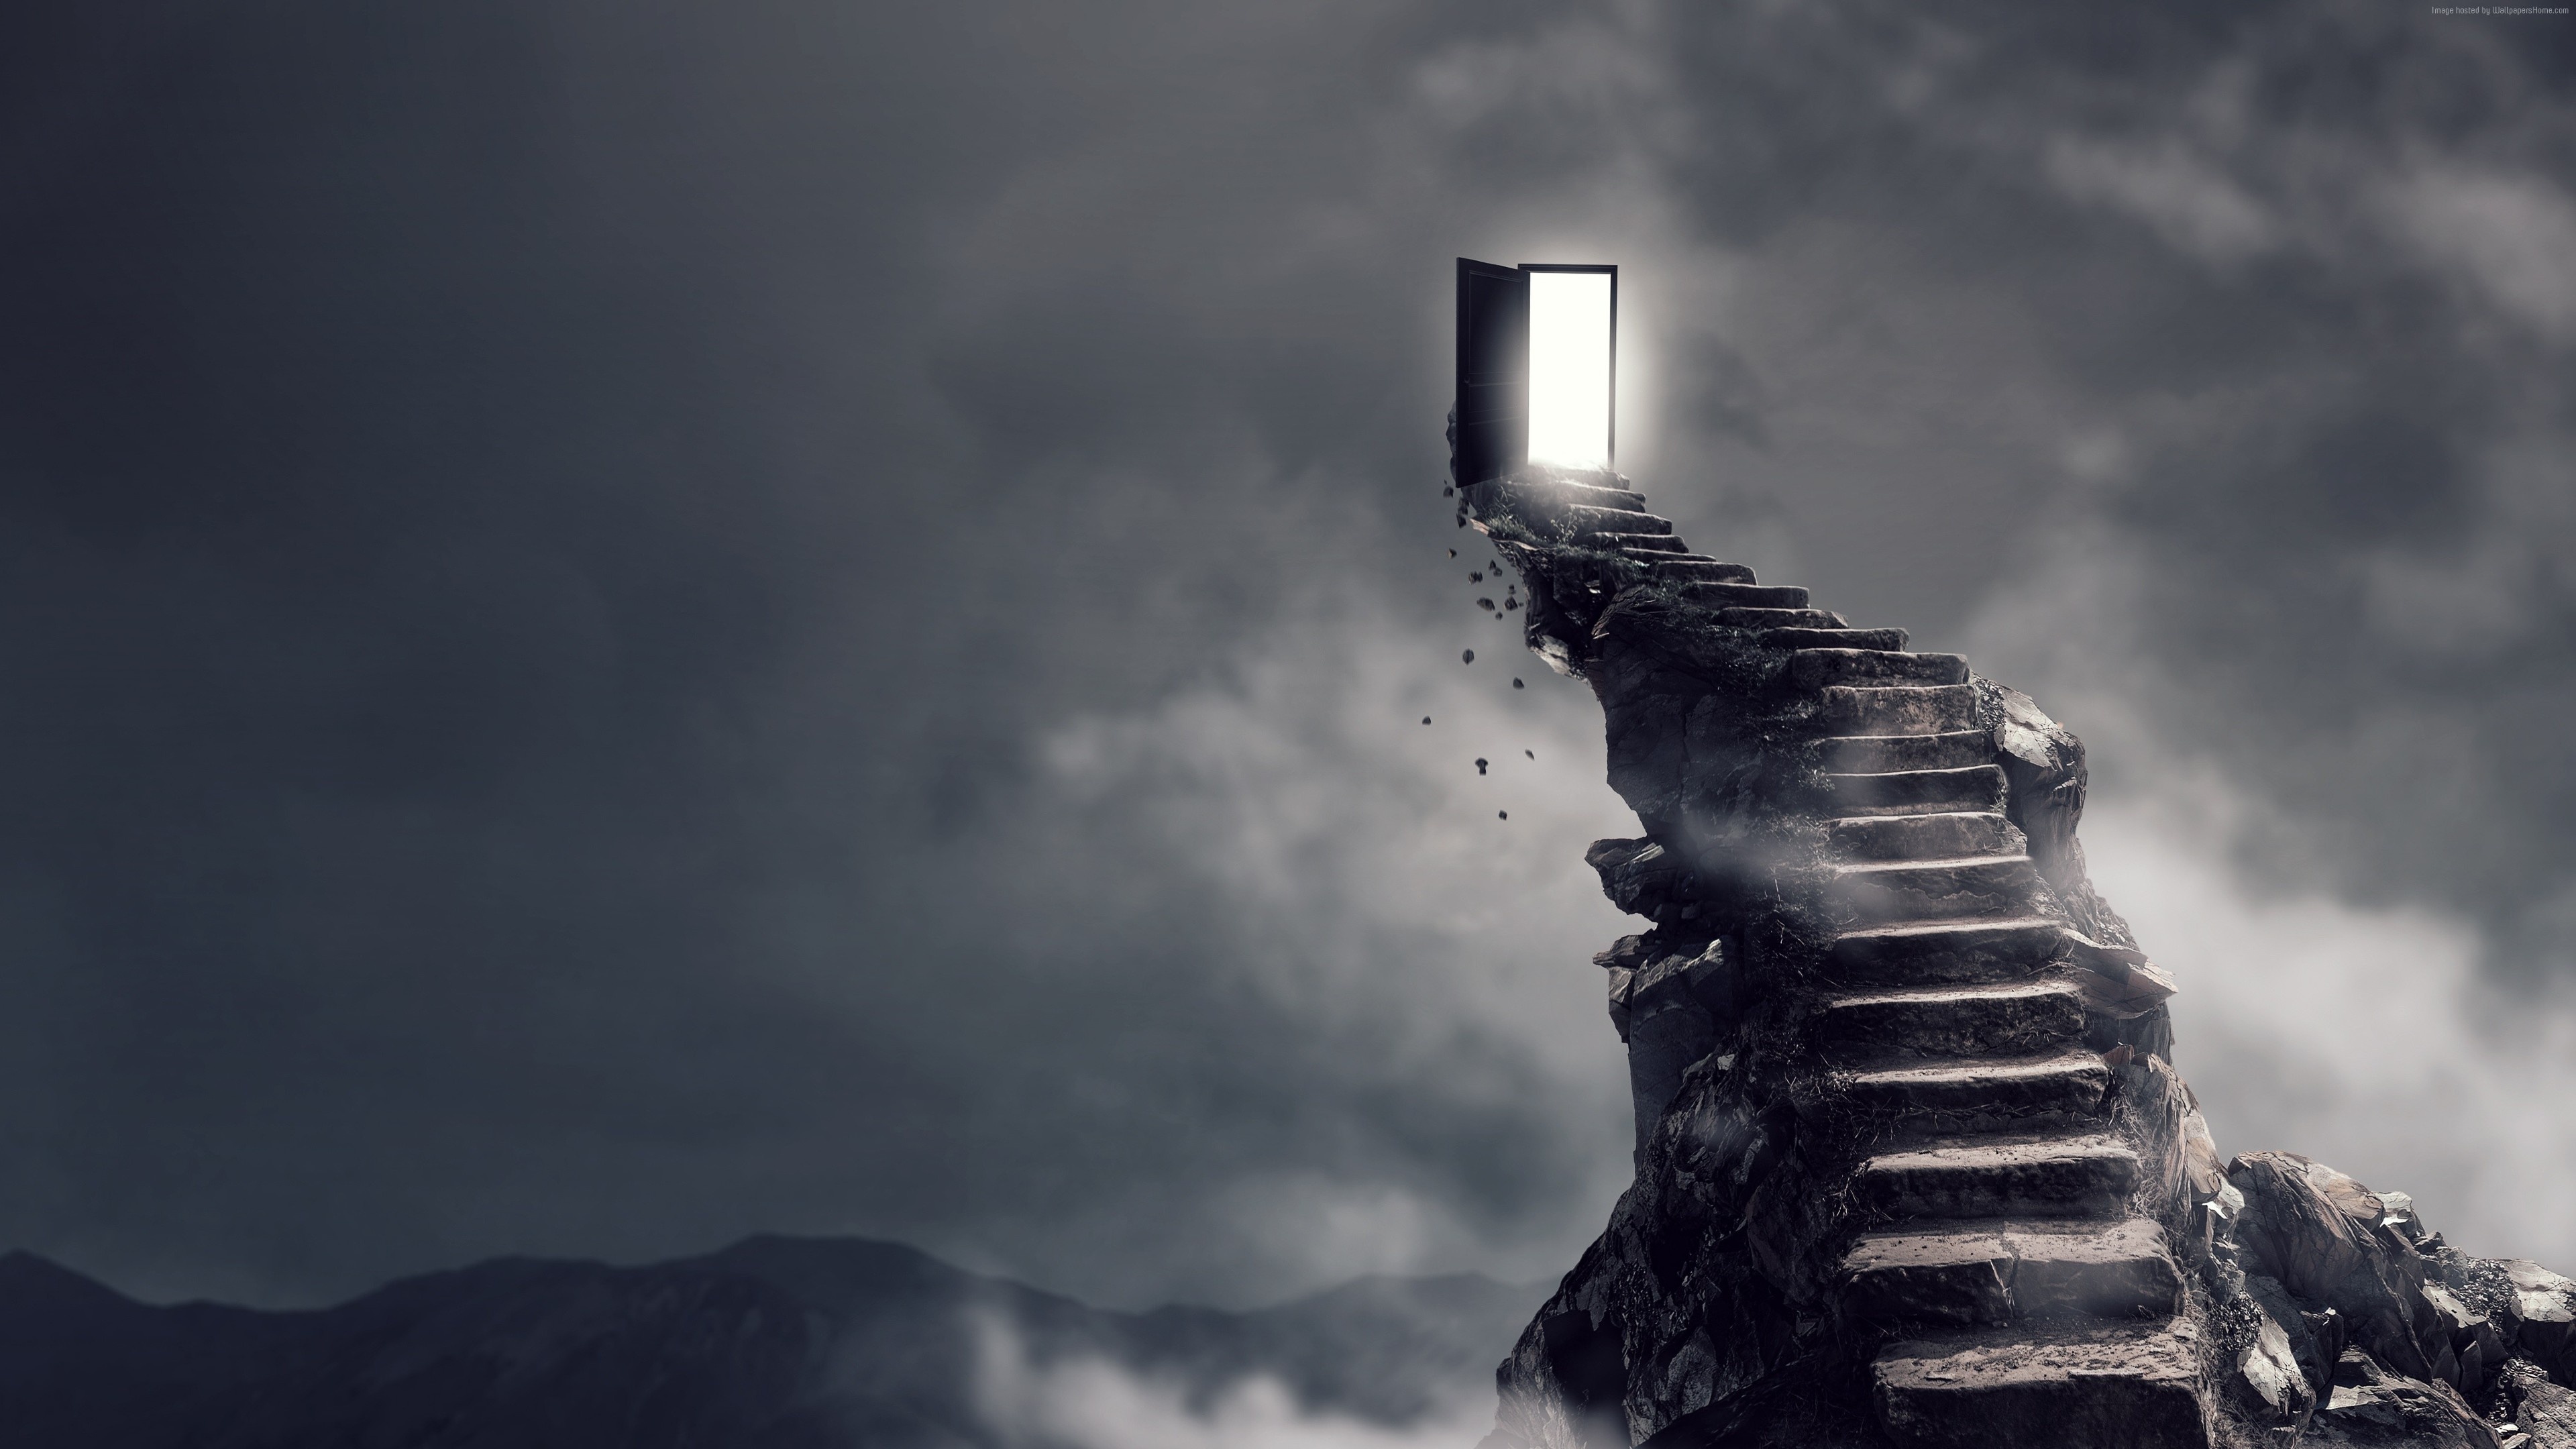 Stairs Wallpapers - Top Free Stairs Backgrounds 3840x2160